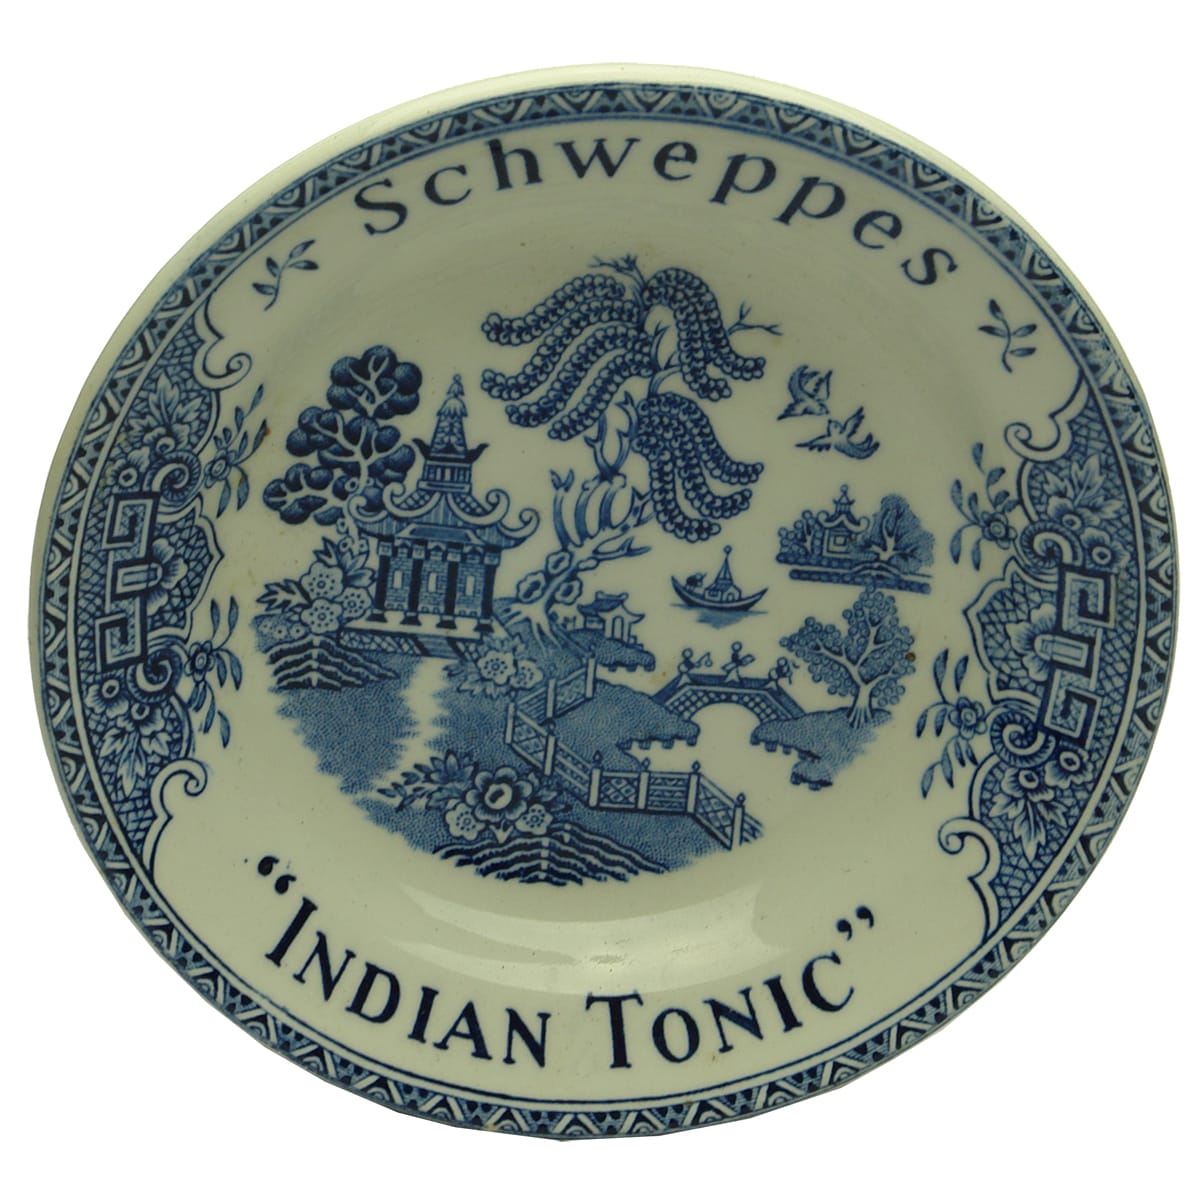 Change Tray. Schweppes, Indian Tonic. Willow Pattern. Blue.